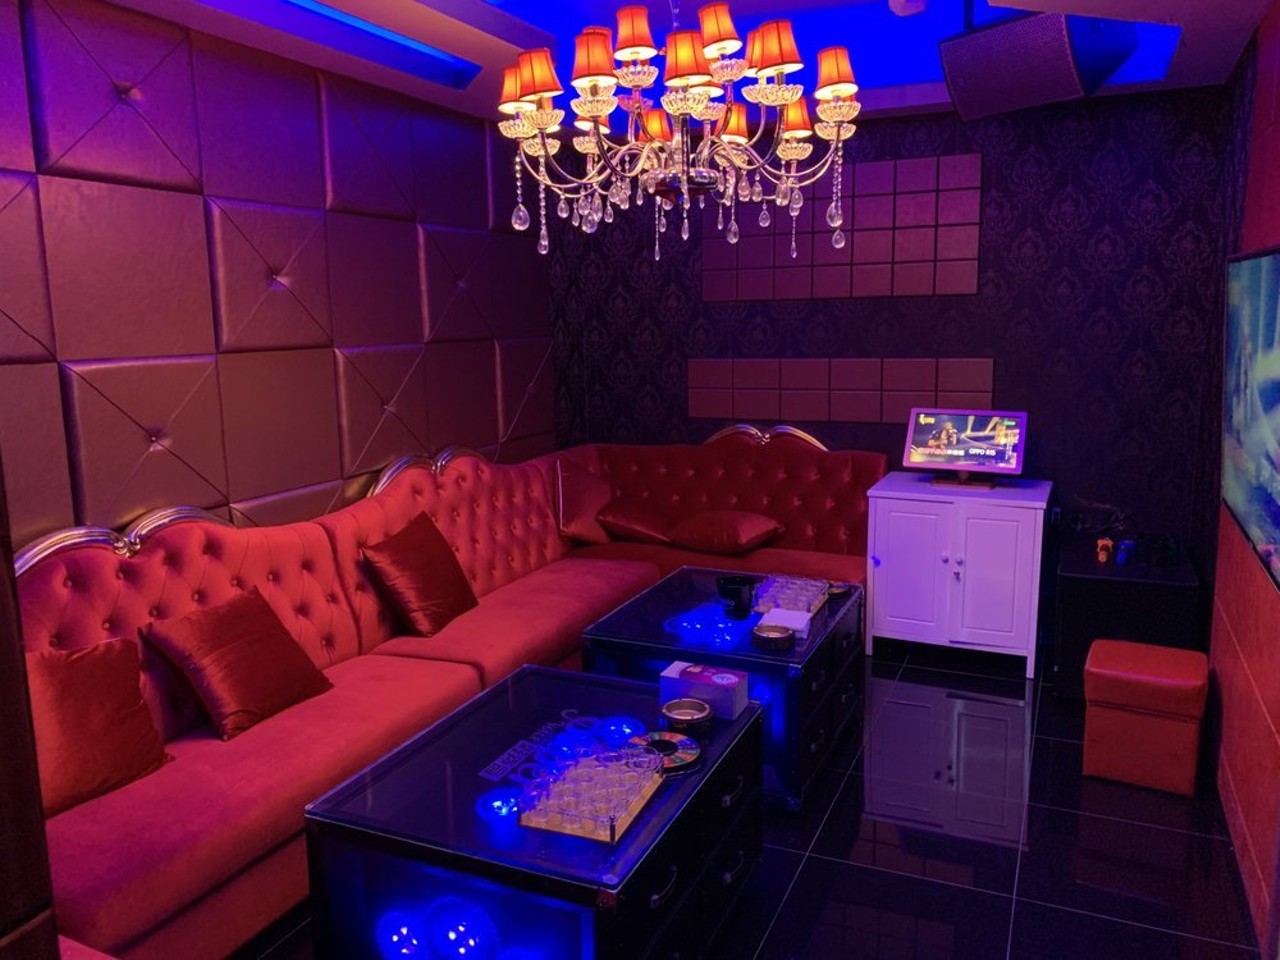 Rent a private karaoke room
Various locations
You can really sing solo wherever you want, but a little stardom never hurts. Elevate your solo imaginary performances with a private karaoke room, where no one can judge you.